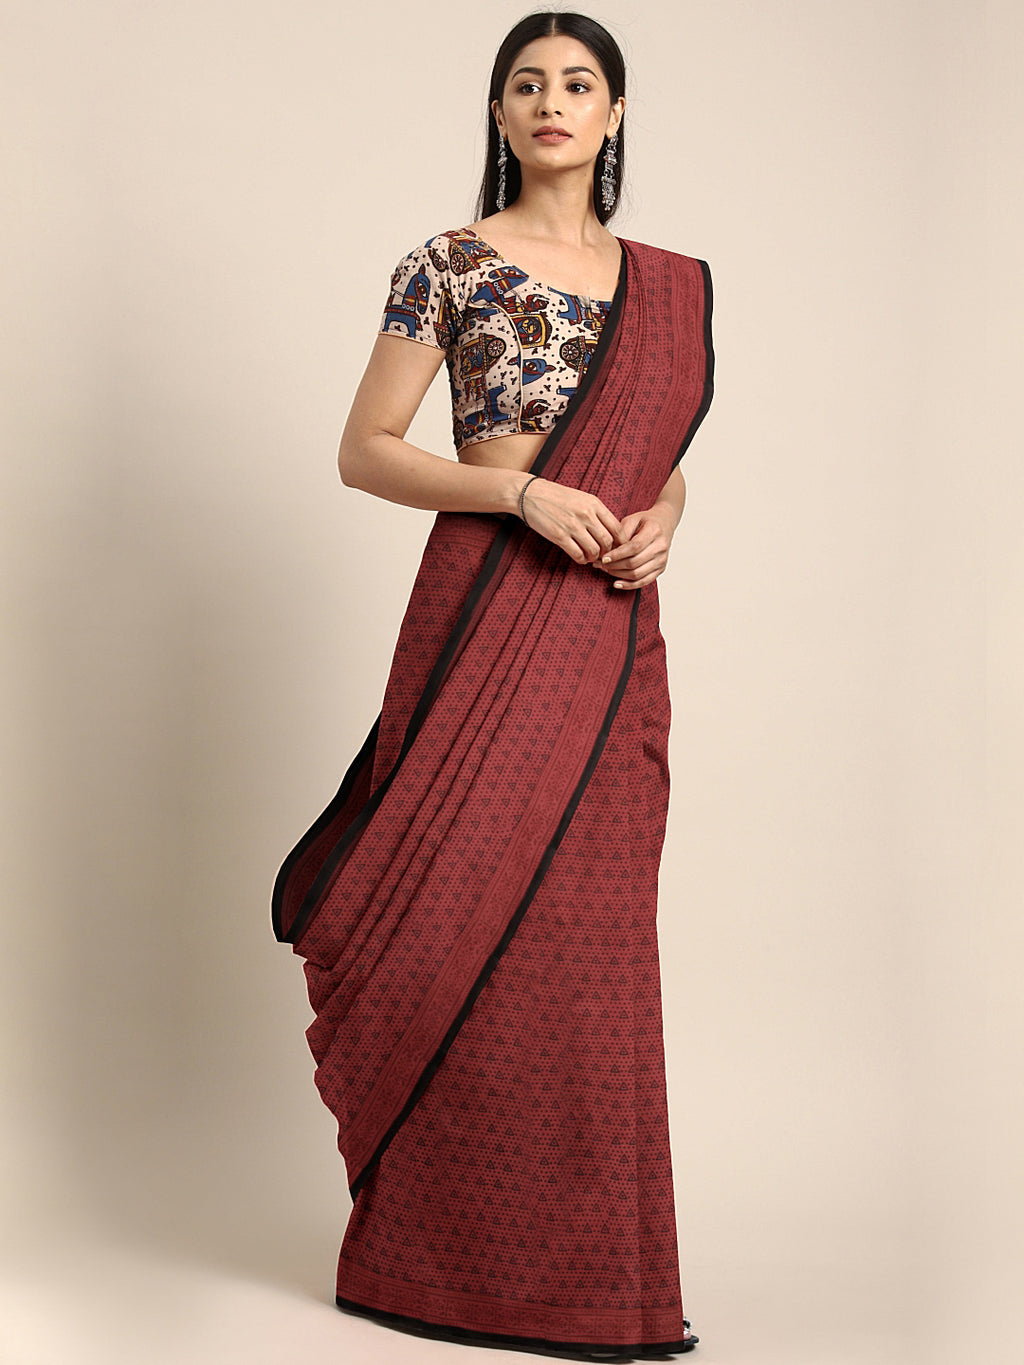 Maroon and Black, Kalakari India Maroon & Black Pure Cotton Handblock Bagh Saree ZIBASA0105-Saree-Kalakari India-ZIBASA0105-Bagh, Cotton, Geographical Indication, Hand Crafted, Heritage Prints, Natural Dyes, Red, Sarees, Sustainable Fabrics, Woven, Yellow-[Linen,Ethnic,wear,Fashionista,Handloom,Handicraft,Indigo,blockprint,block,print,Cotton,Chanderi,Blue, latest,classy,party,bollywood,trendy,summer,style,traditional,formal,elegant,unique,style,hand,block,print, dabu,booti,gift,present,glamorous